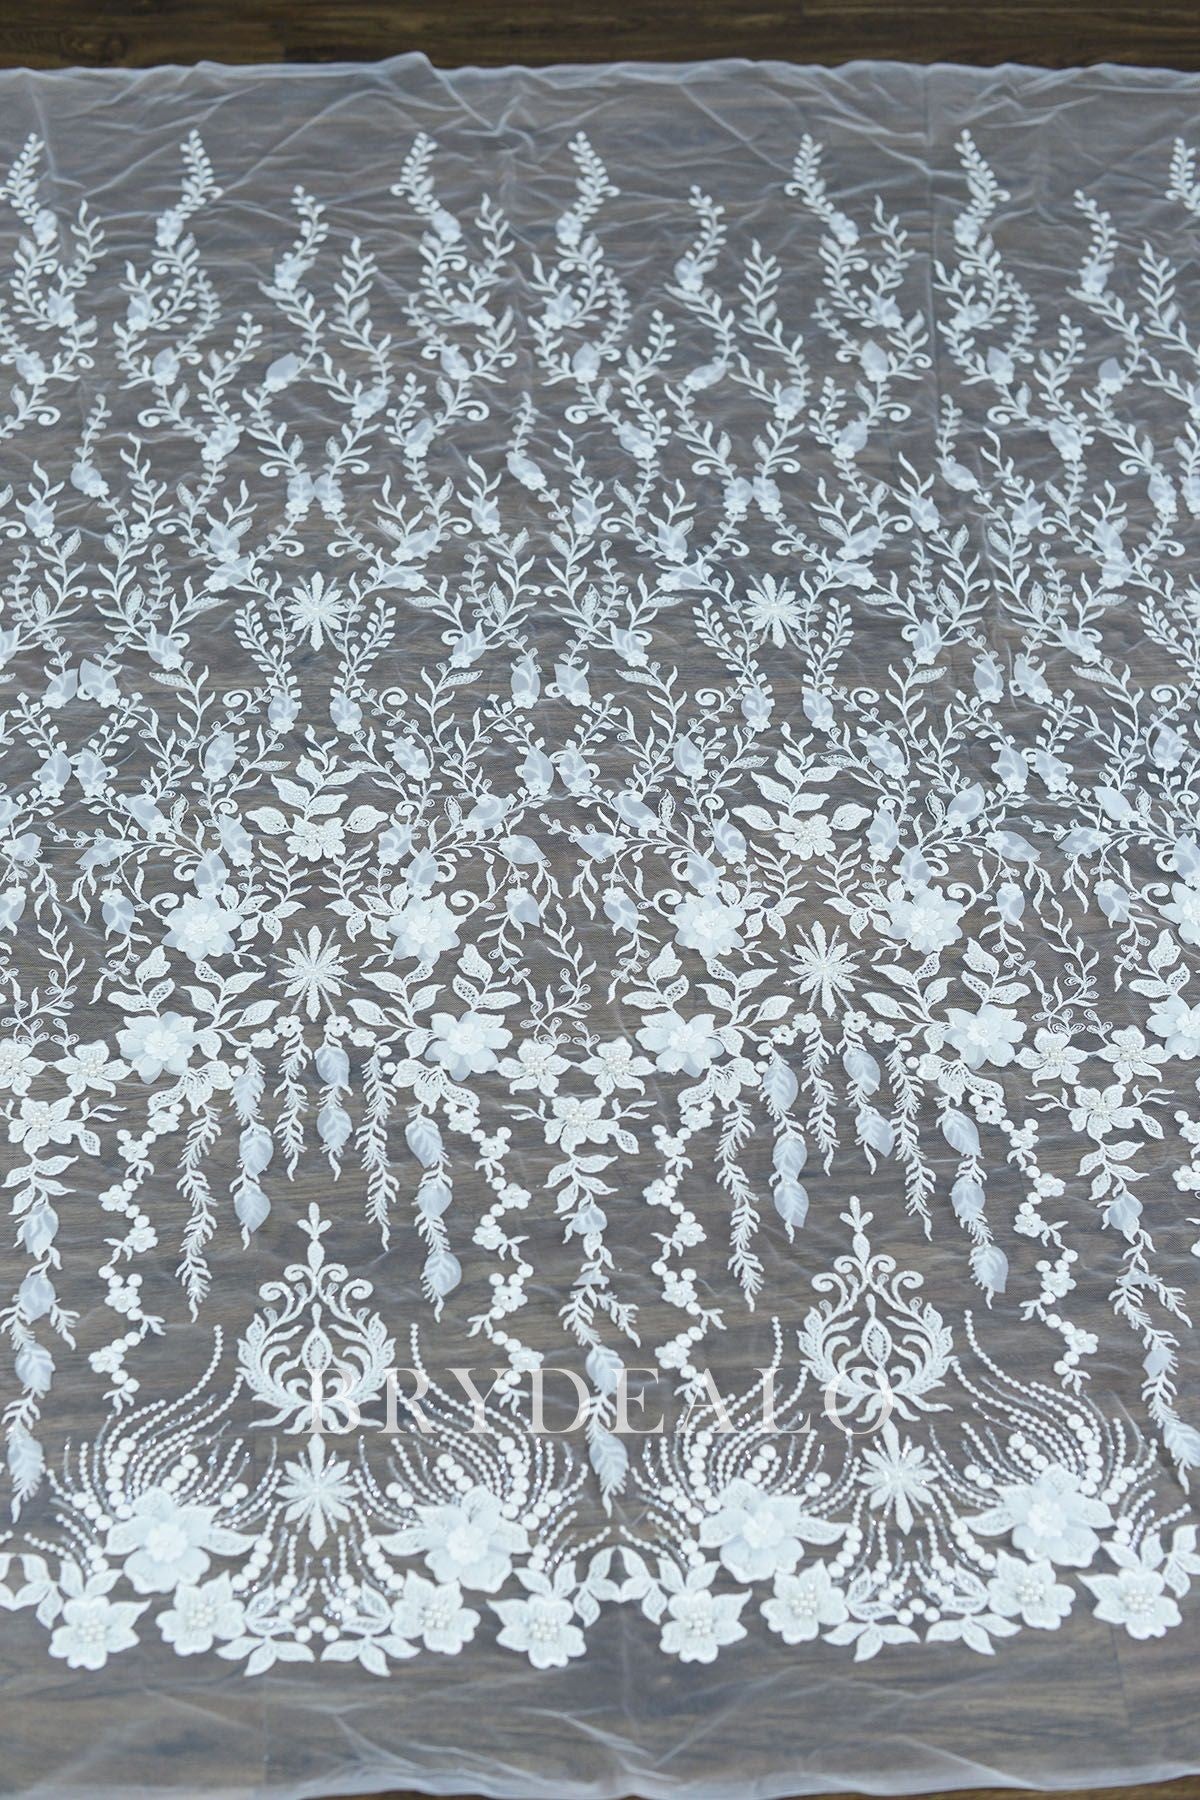 Vine Lace Fabric with Pearls